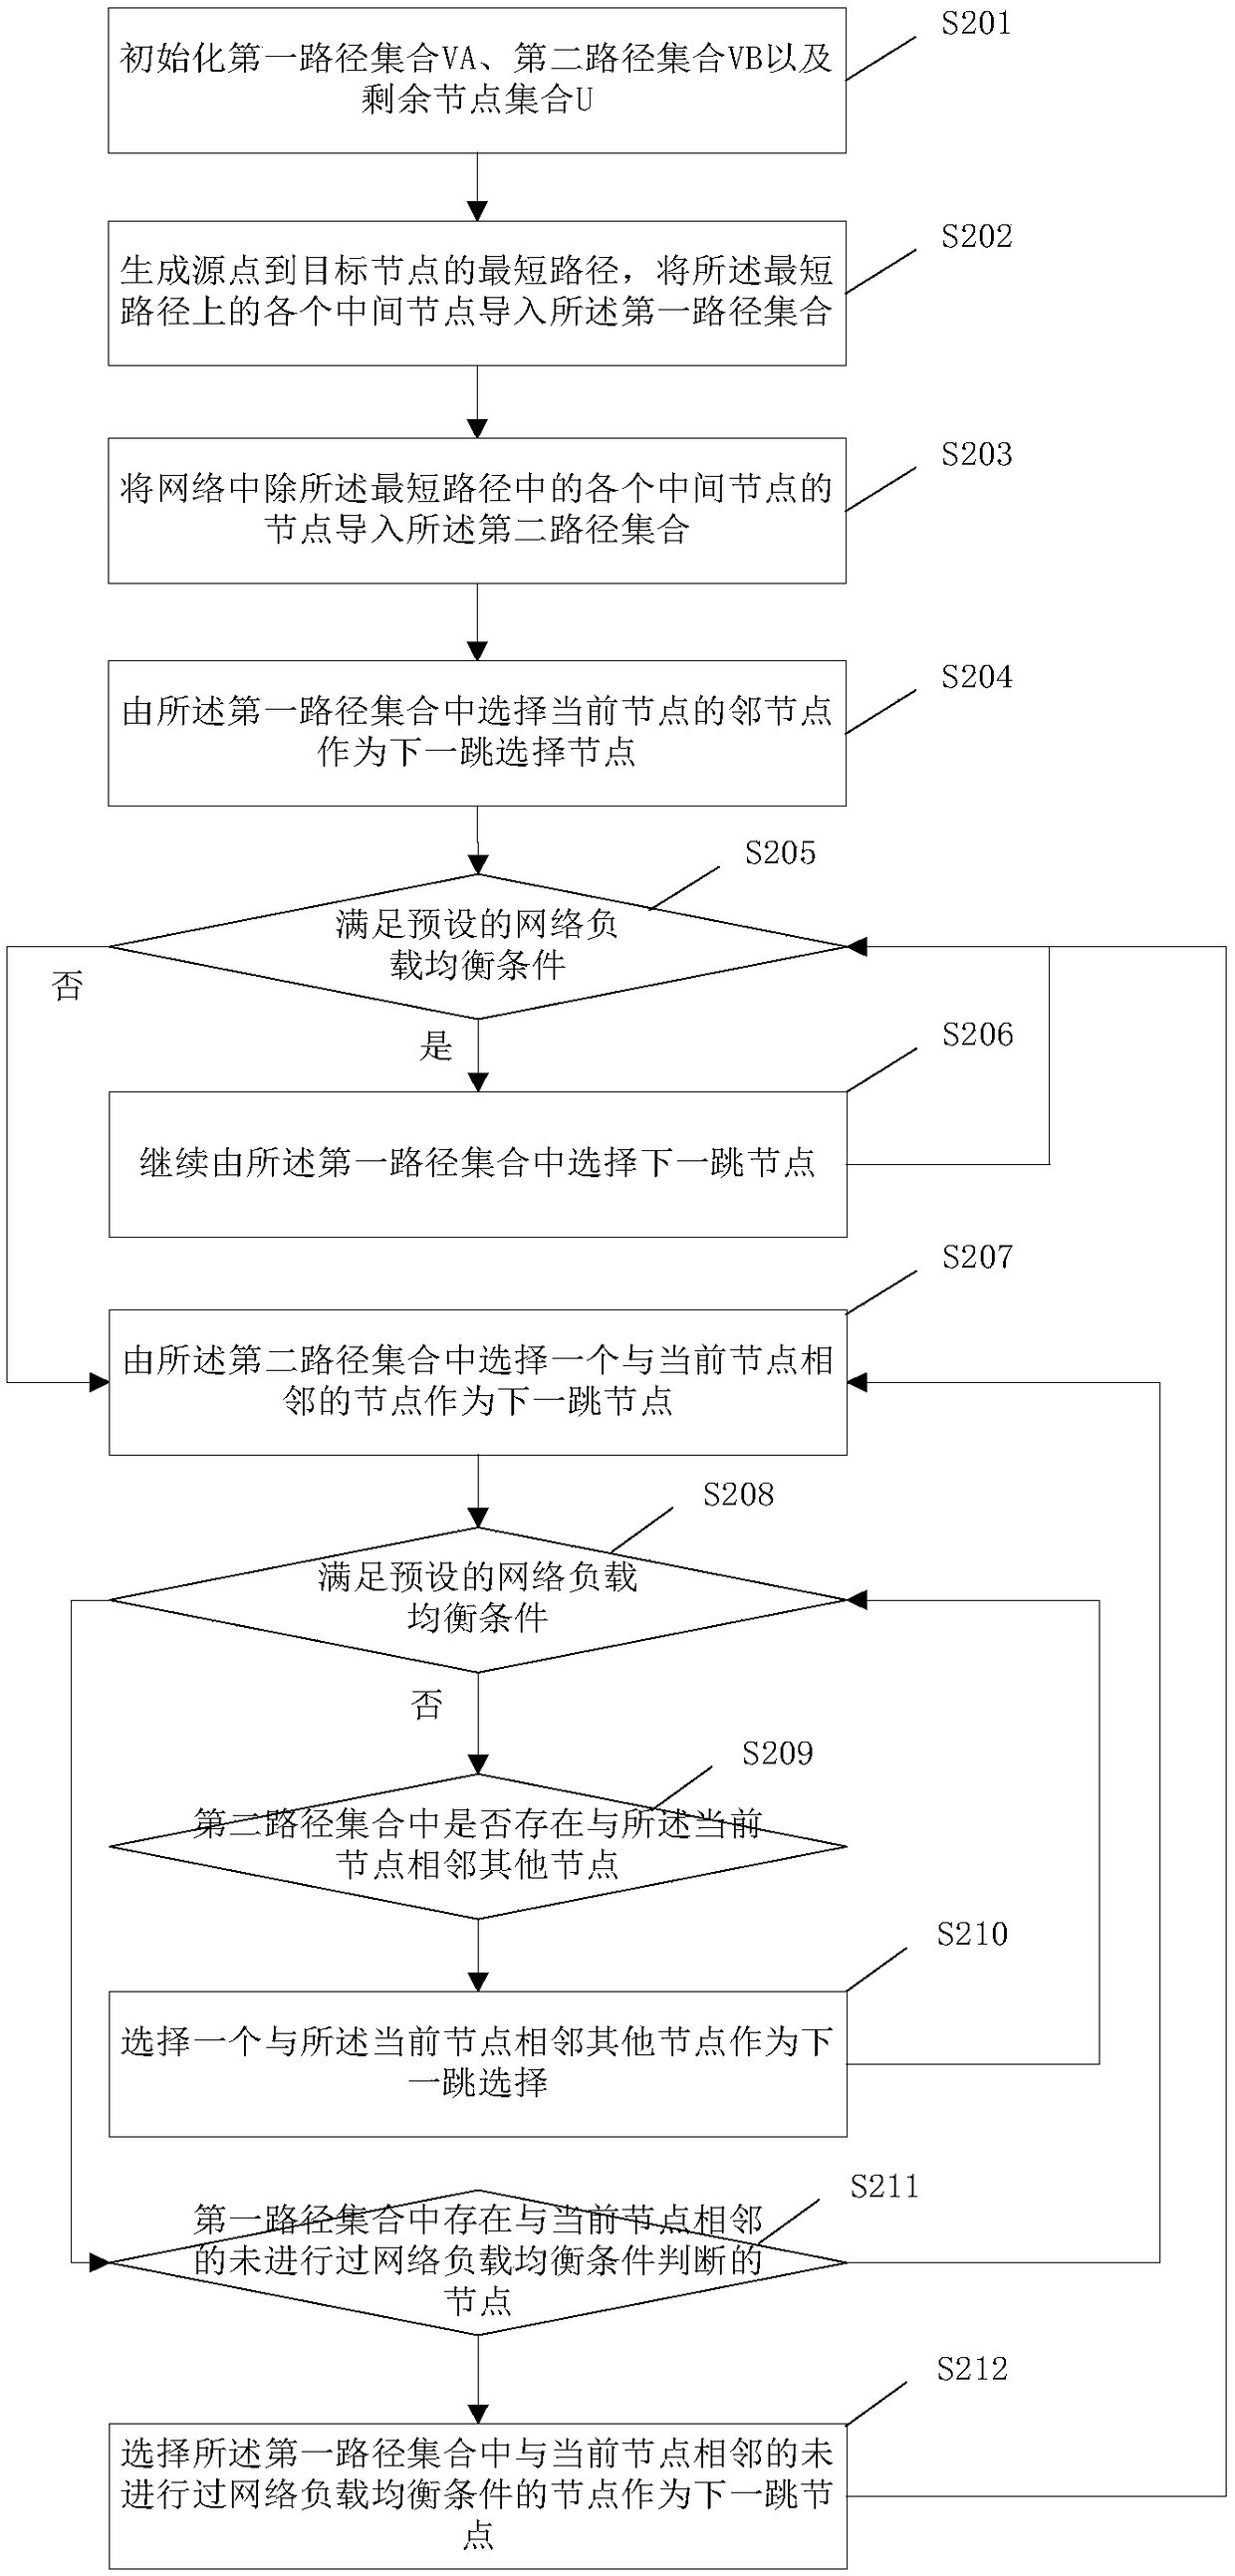 Wireless network path planning method and device